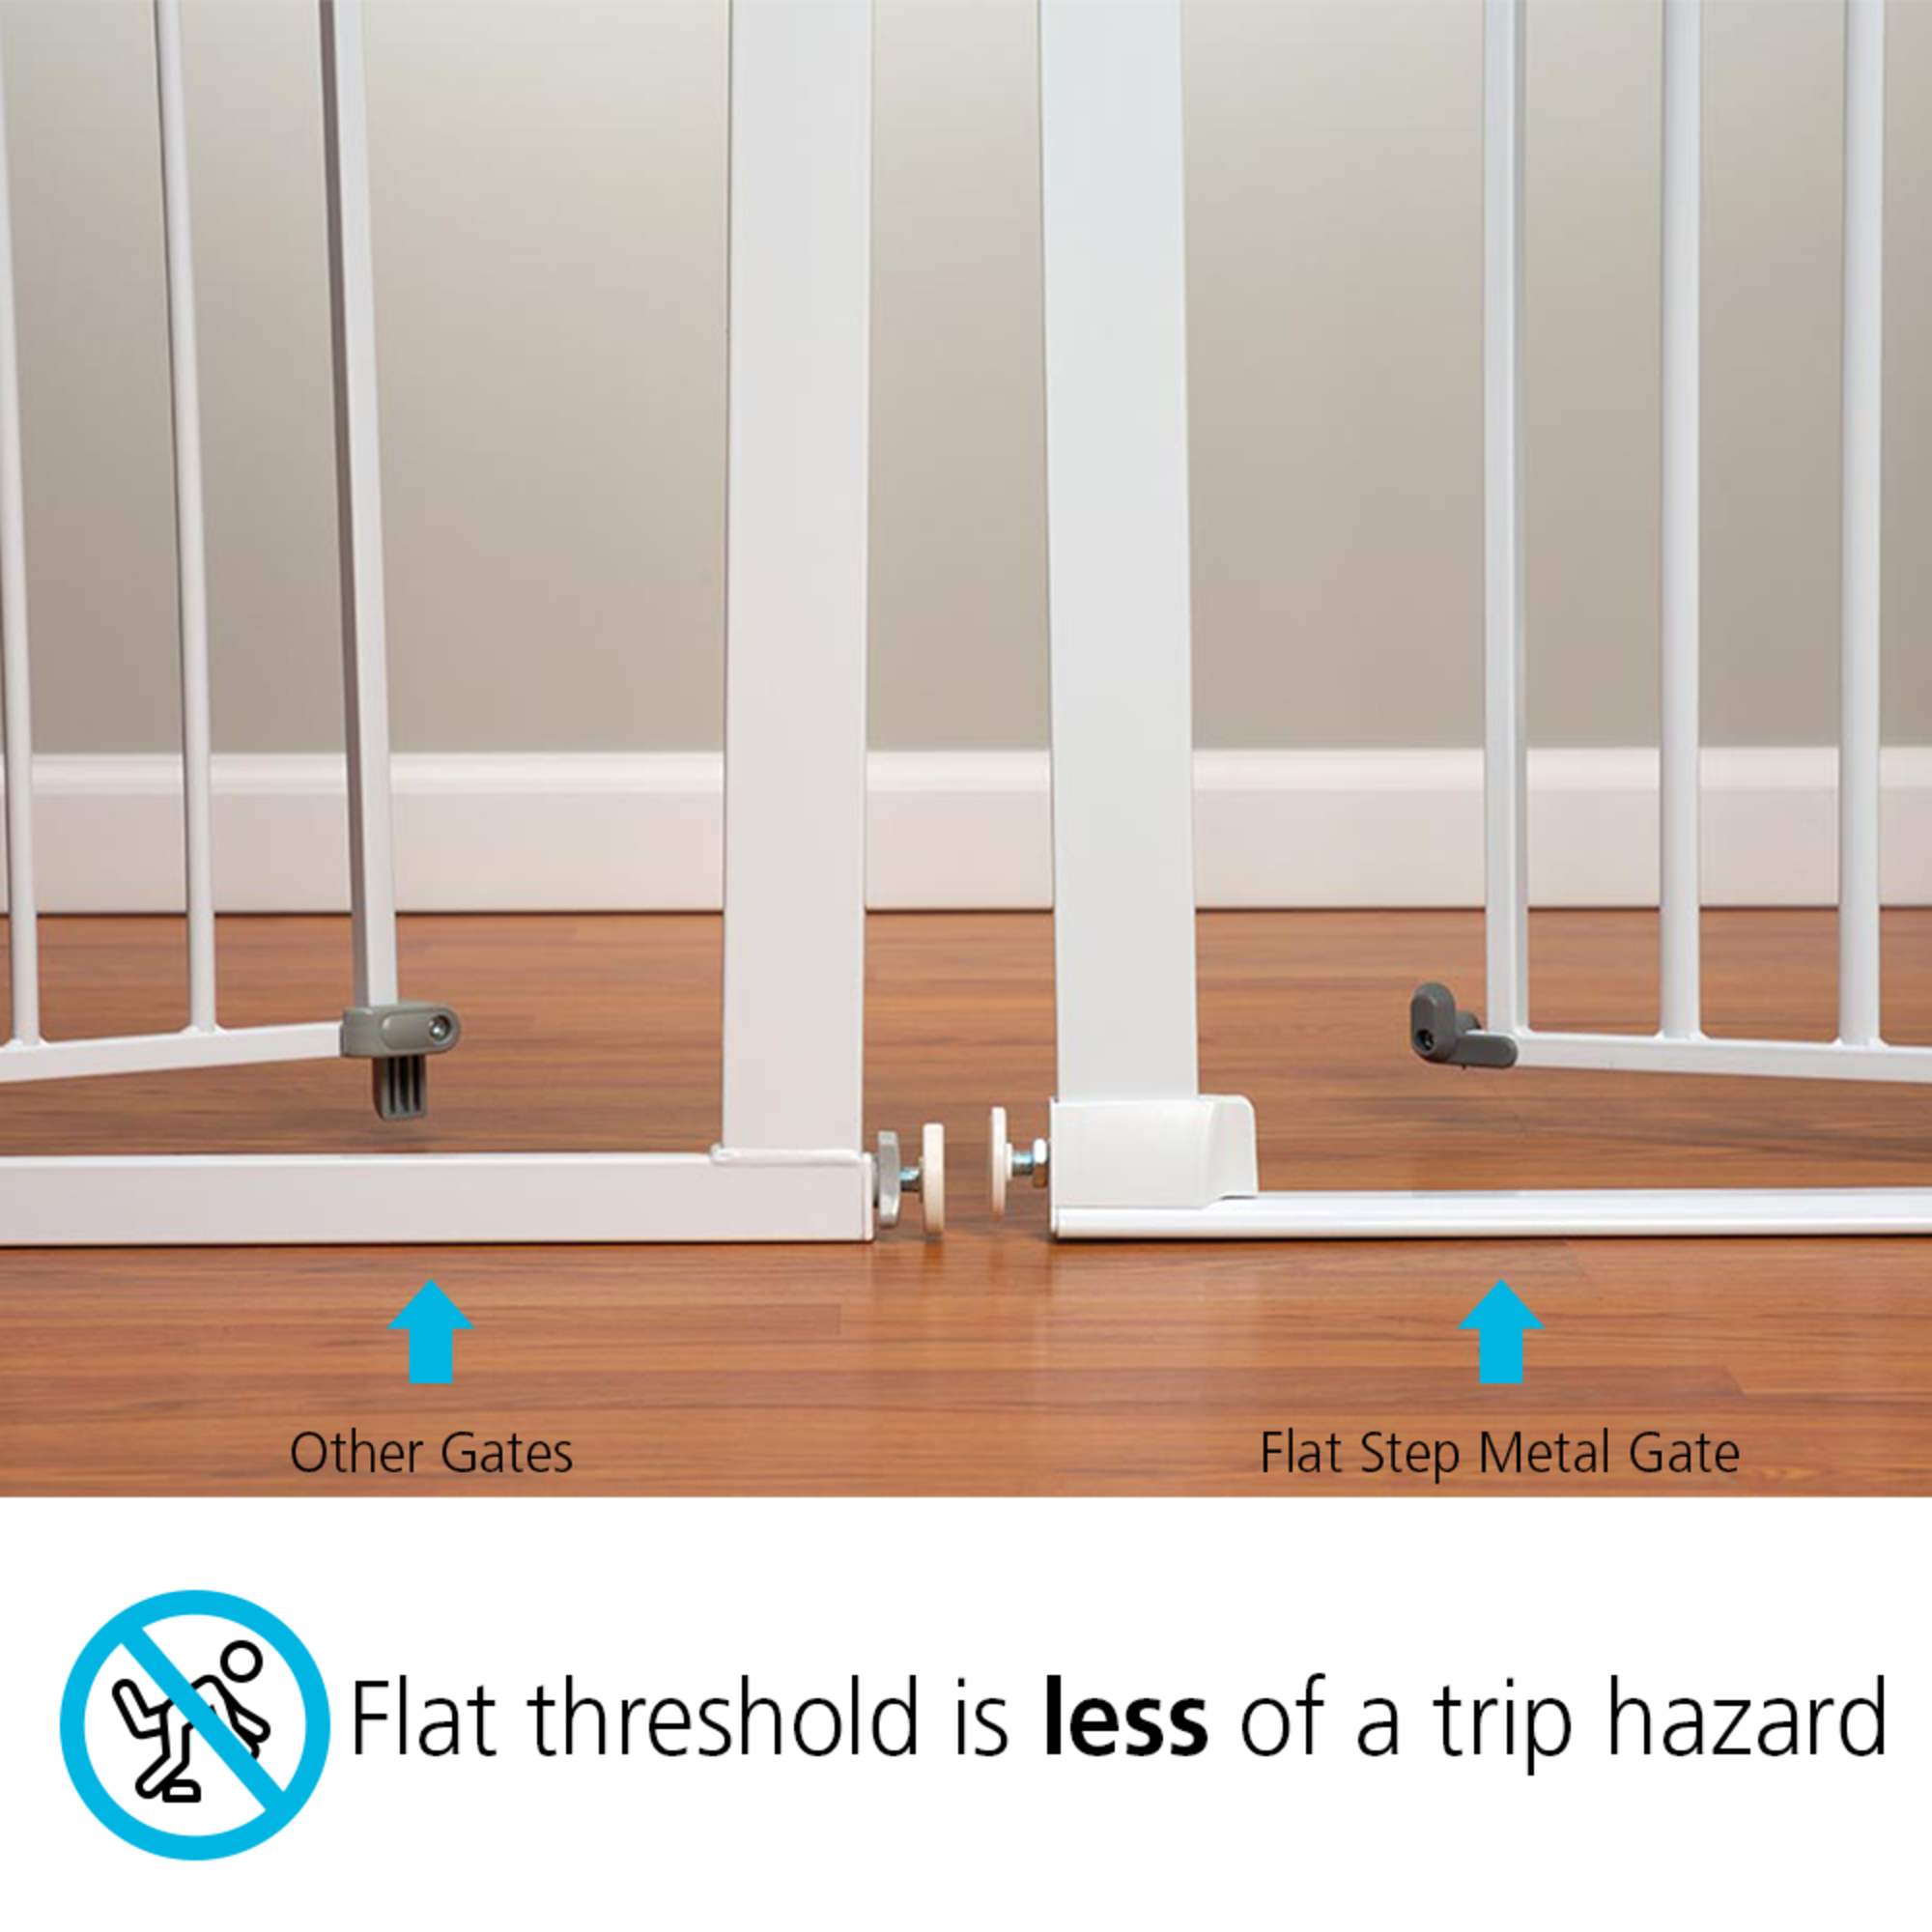 Flat threshold is less of a trip hazard.  Picture shows how this gate compares to other gates.